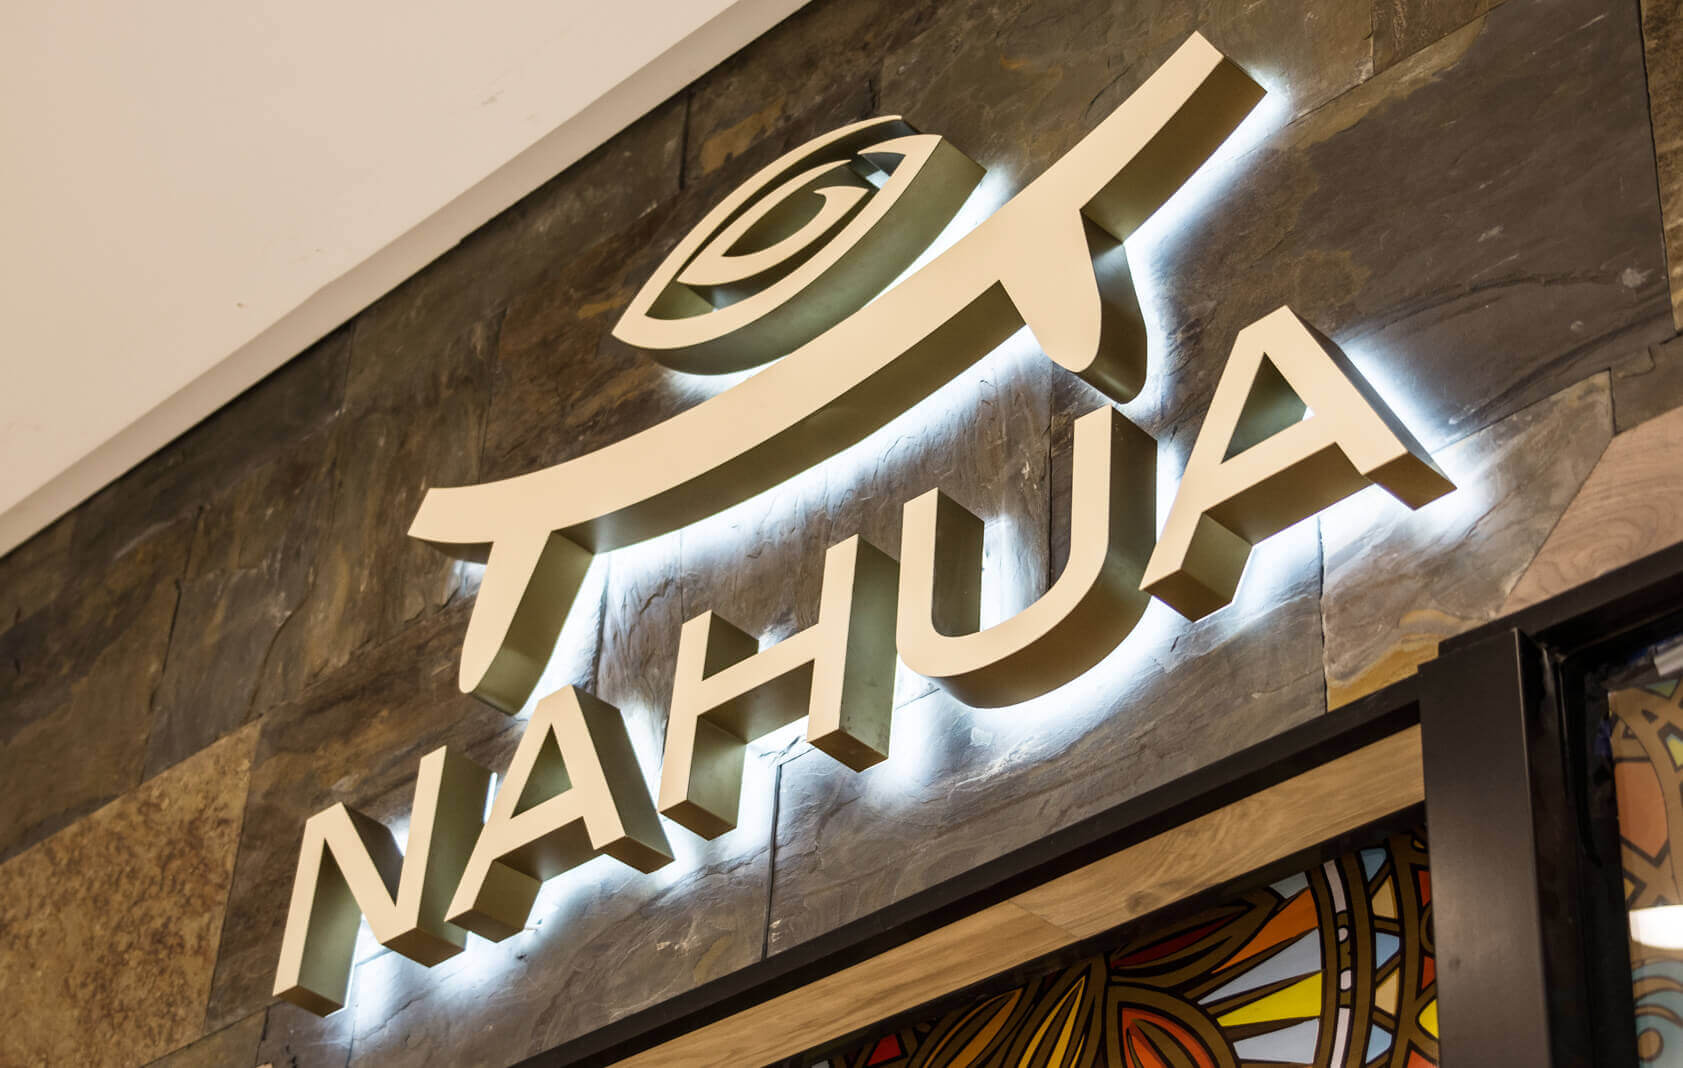 NAHUA - Nahua - LED letters of light placed on the wall, halo effect visible